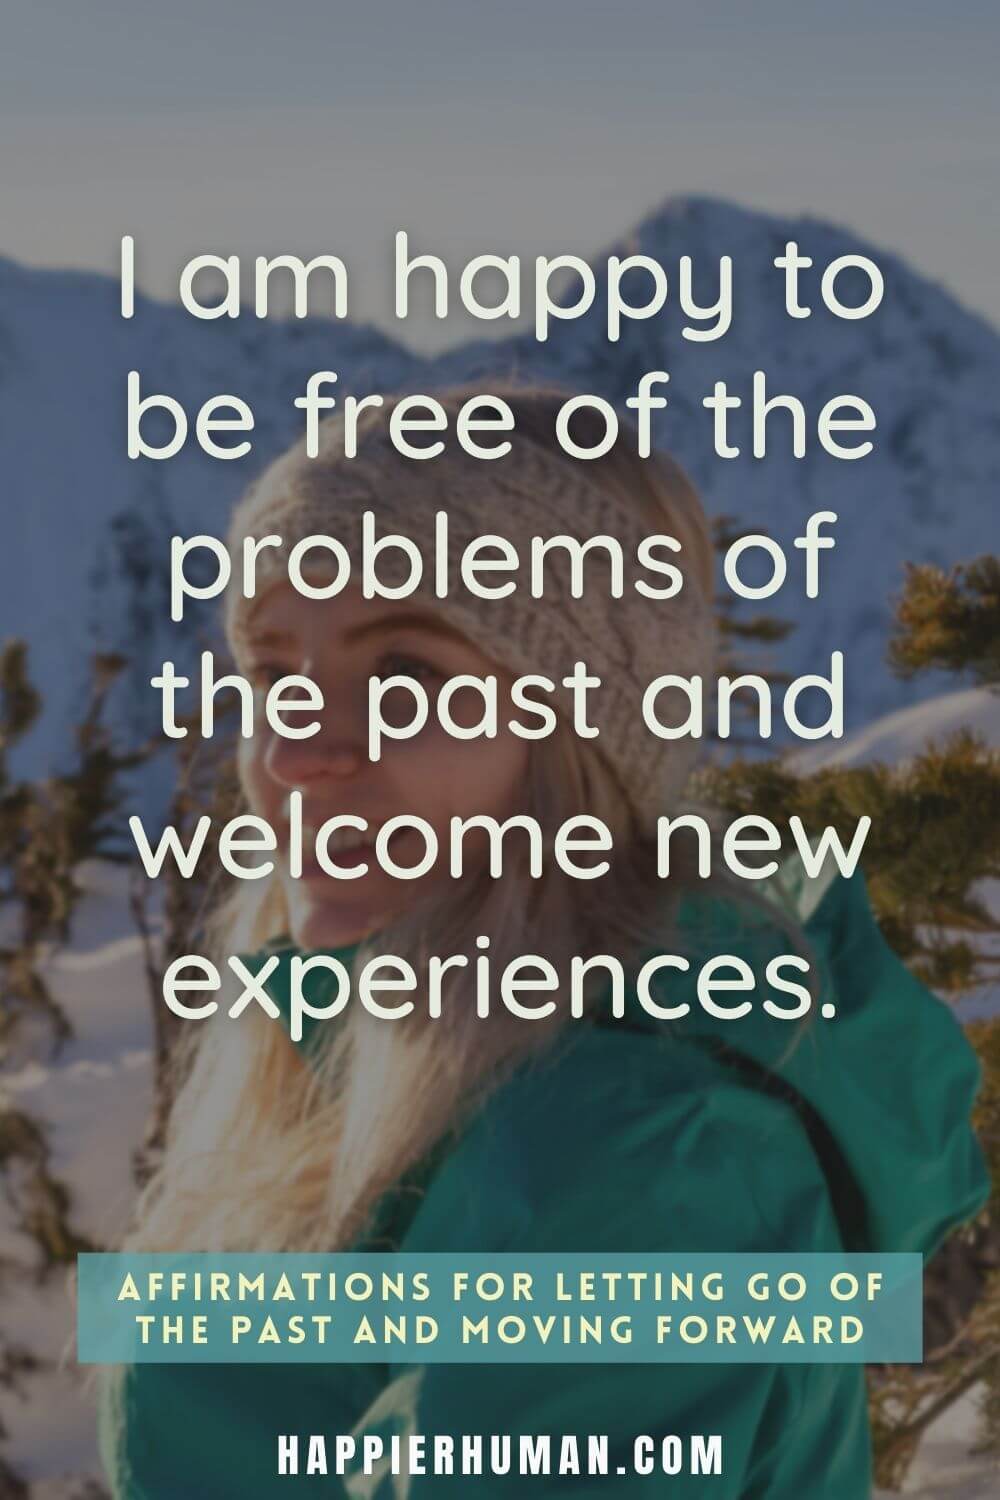 Affirmations for Letting Go - I am happy to be free of the problems of the past and welcome new experiences. | affirmations to let go of anger | affirmations to let go of worry | mantras for letting go of the past